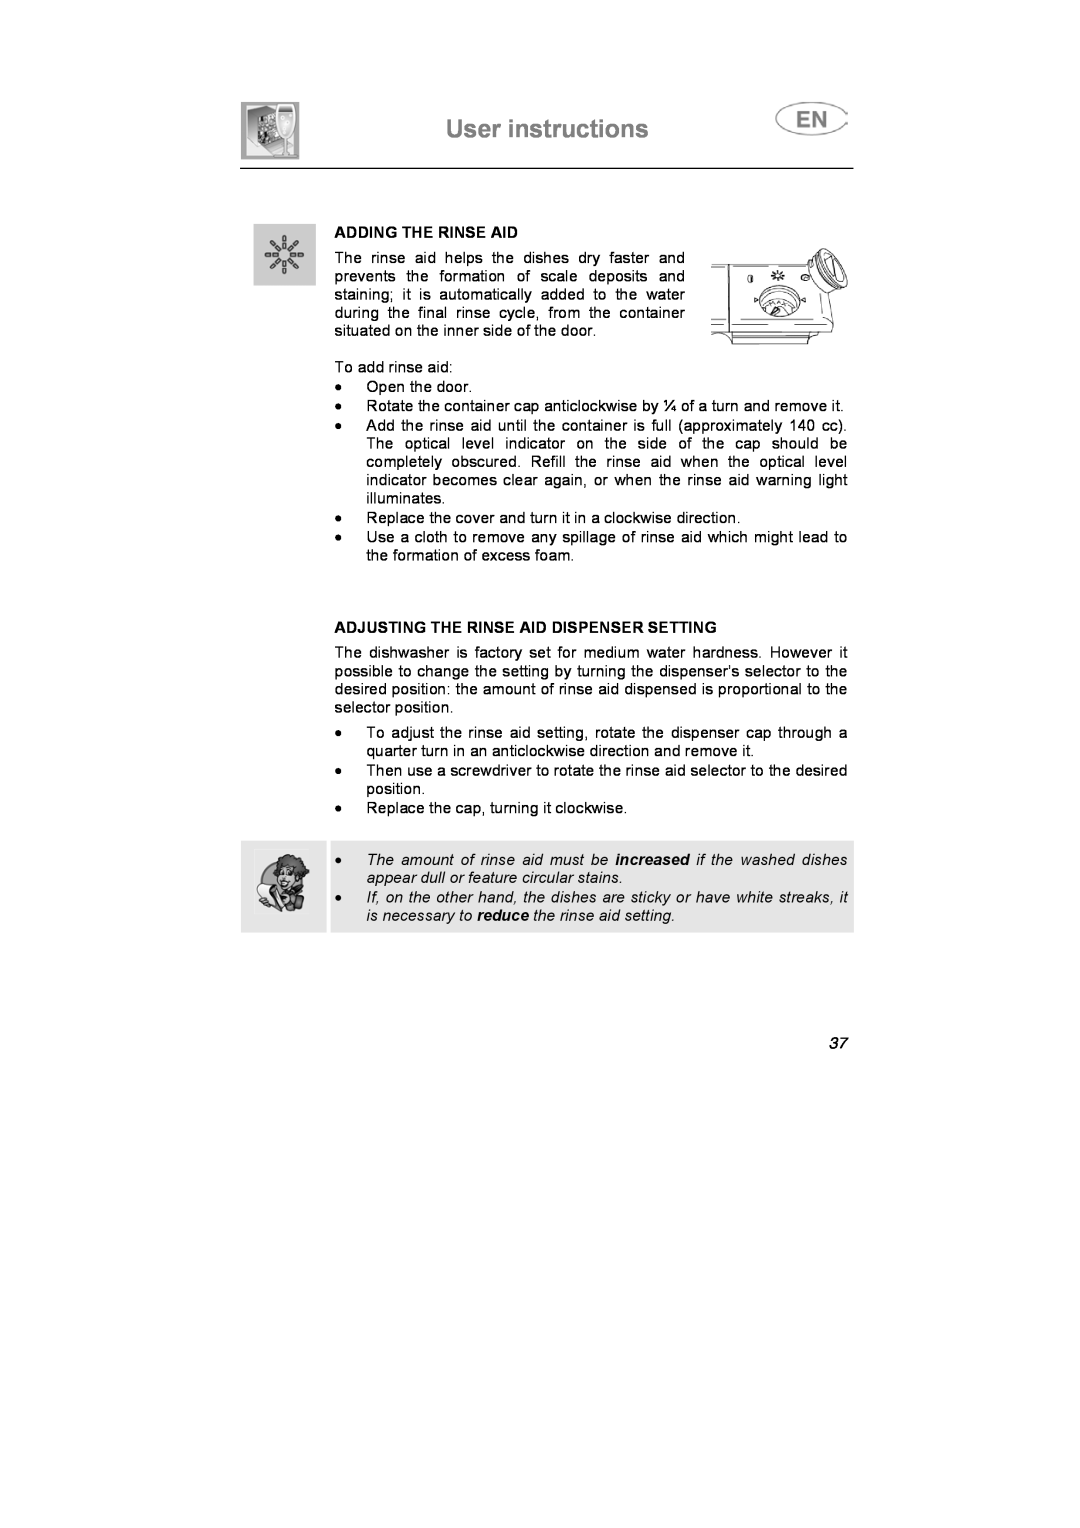 Smeg BLV1RO instruction manual Adding The Rinse Aid, Adjusting The Rinse Aid Dispenser Setting, User instructions 